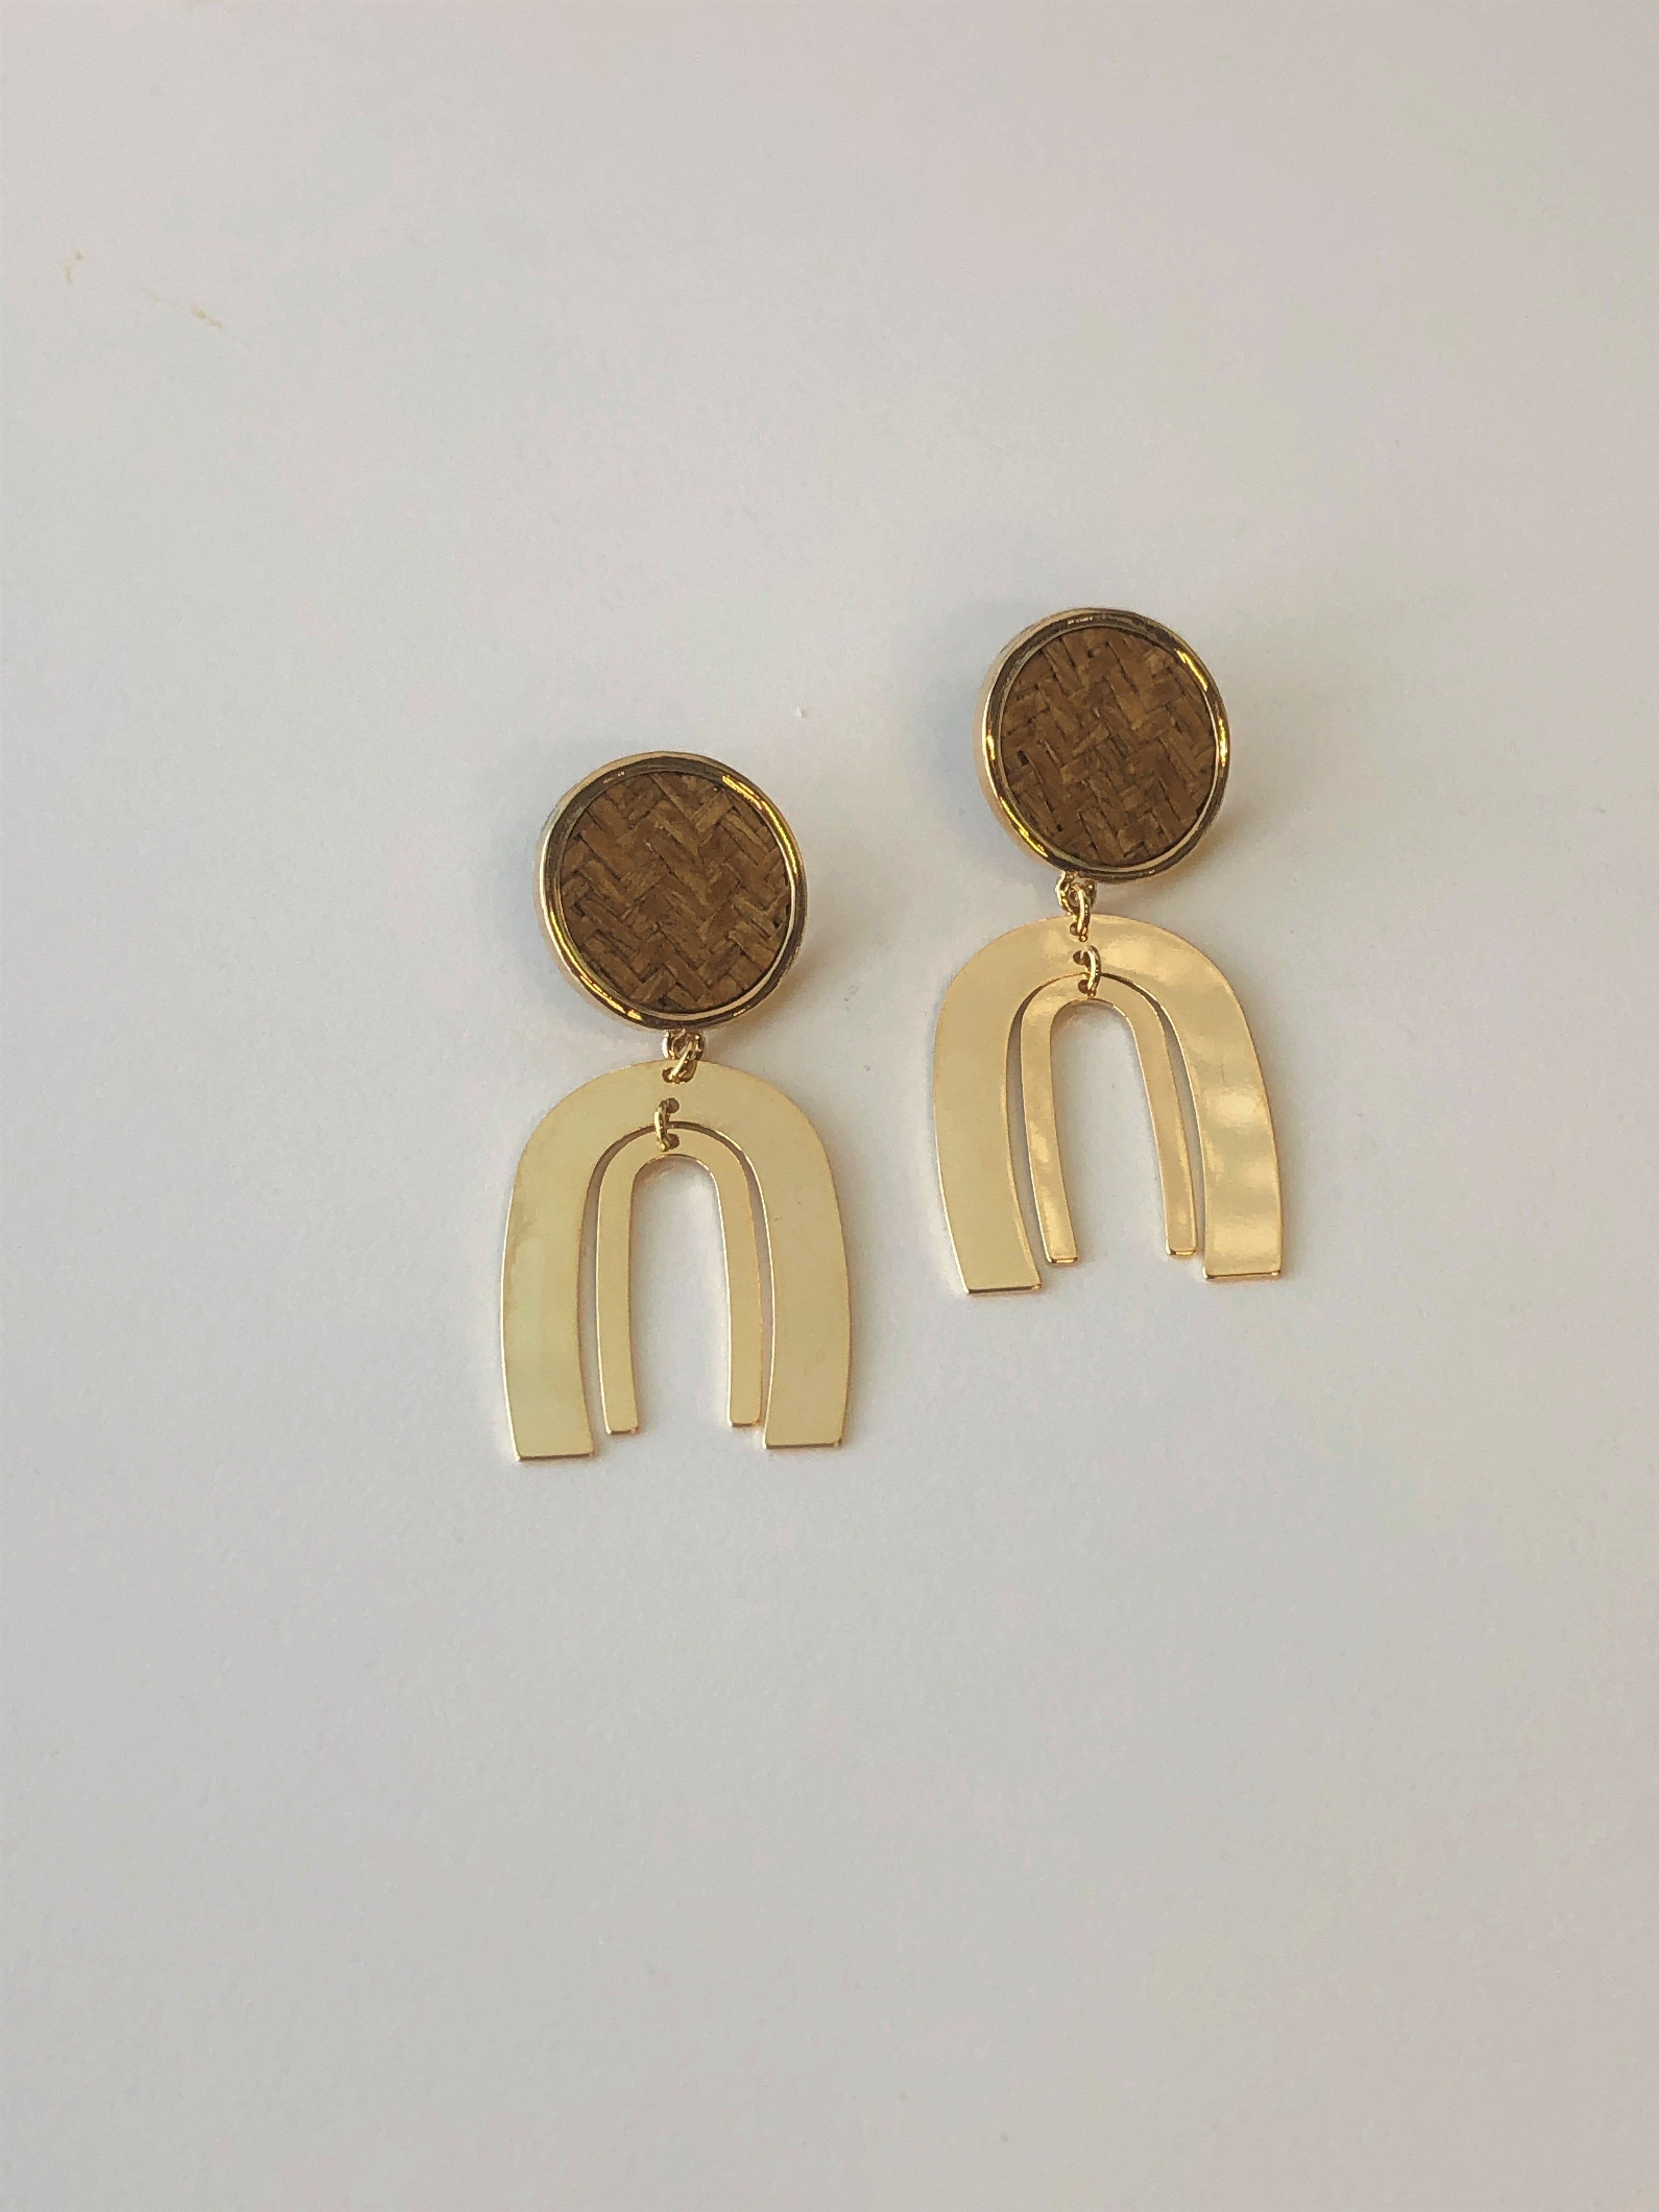 Gold and Woven Drop Earrings - FINAL SALE